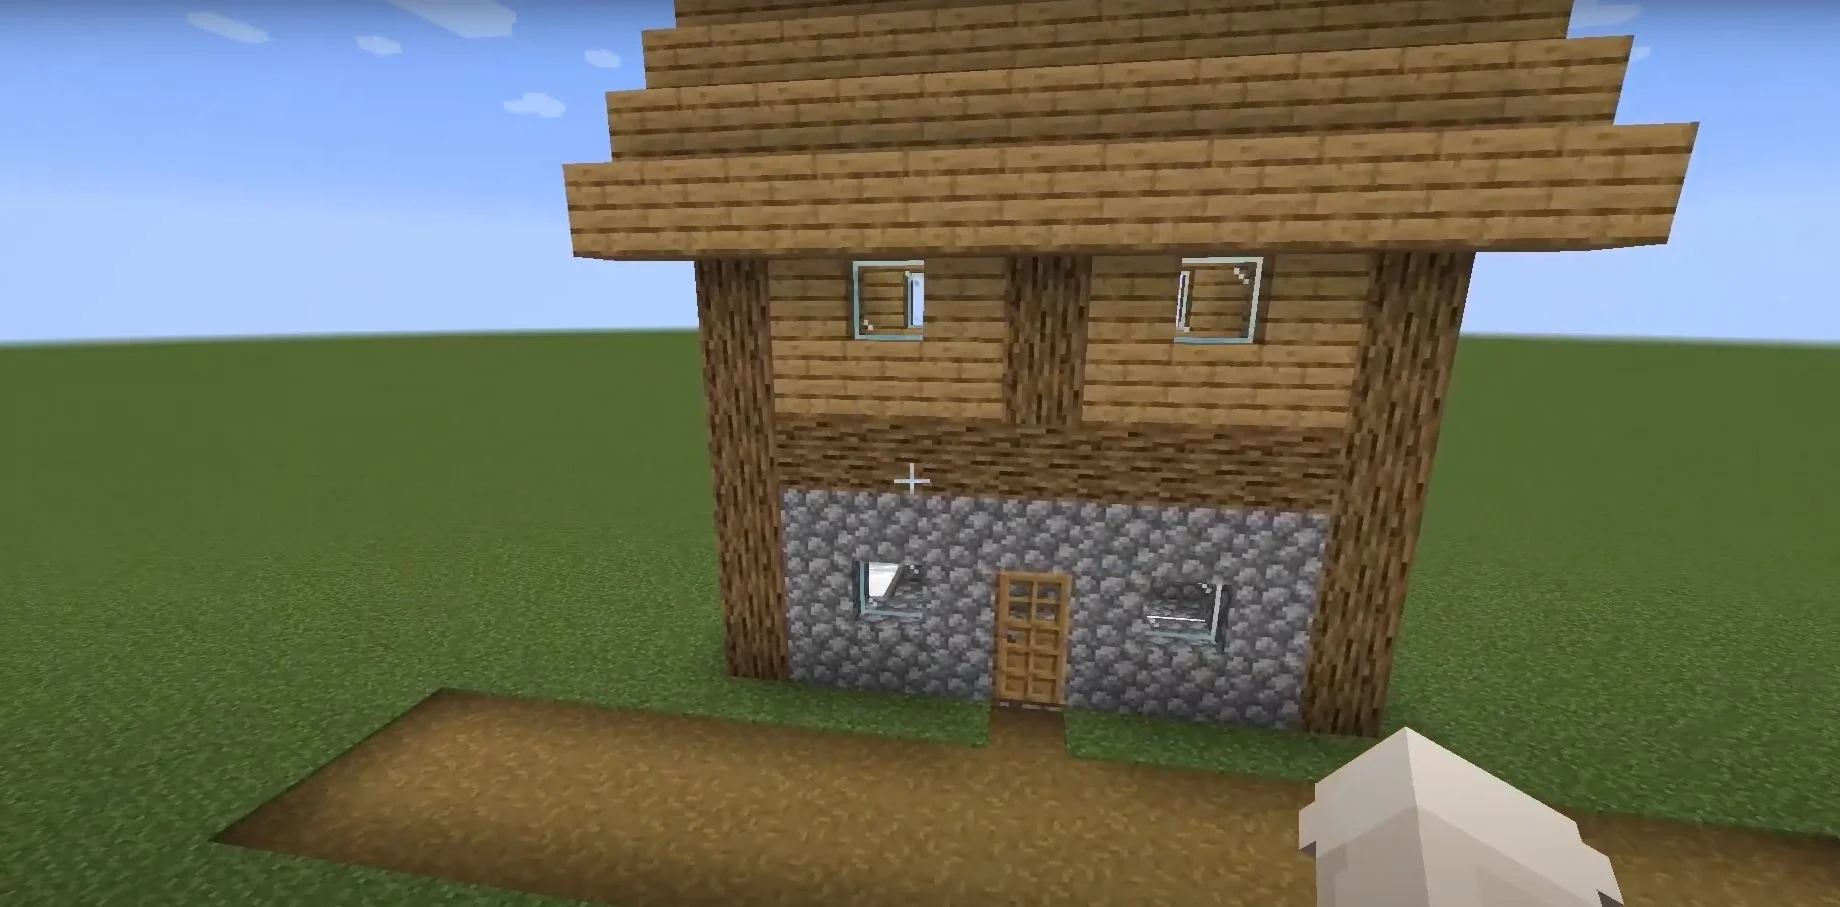 Villager houses in Minecraft